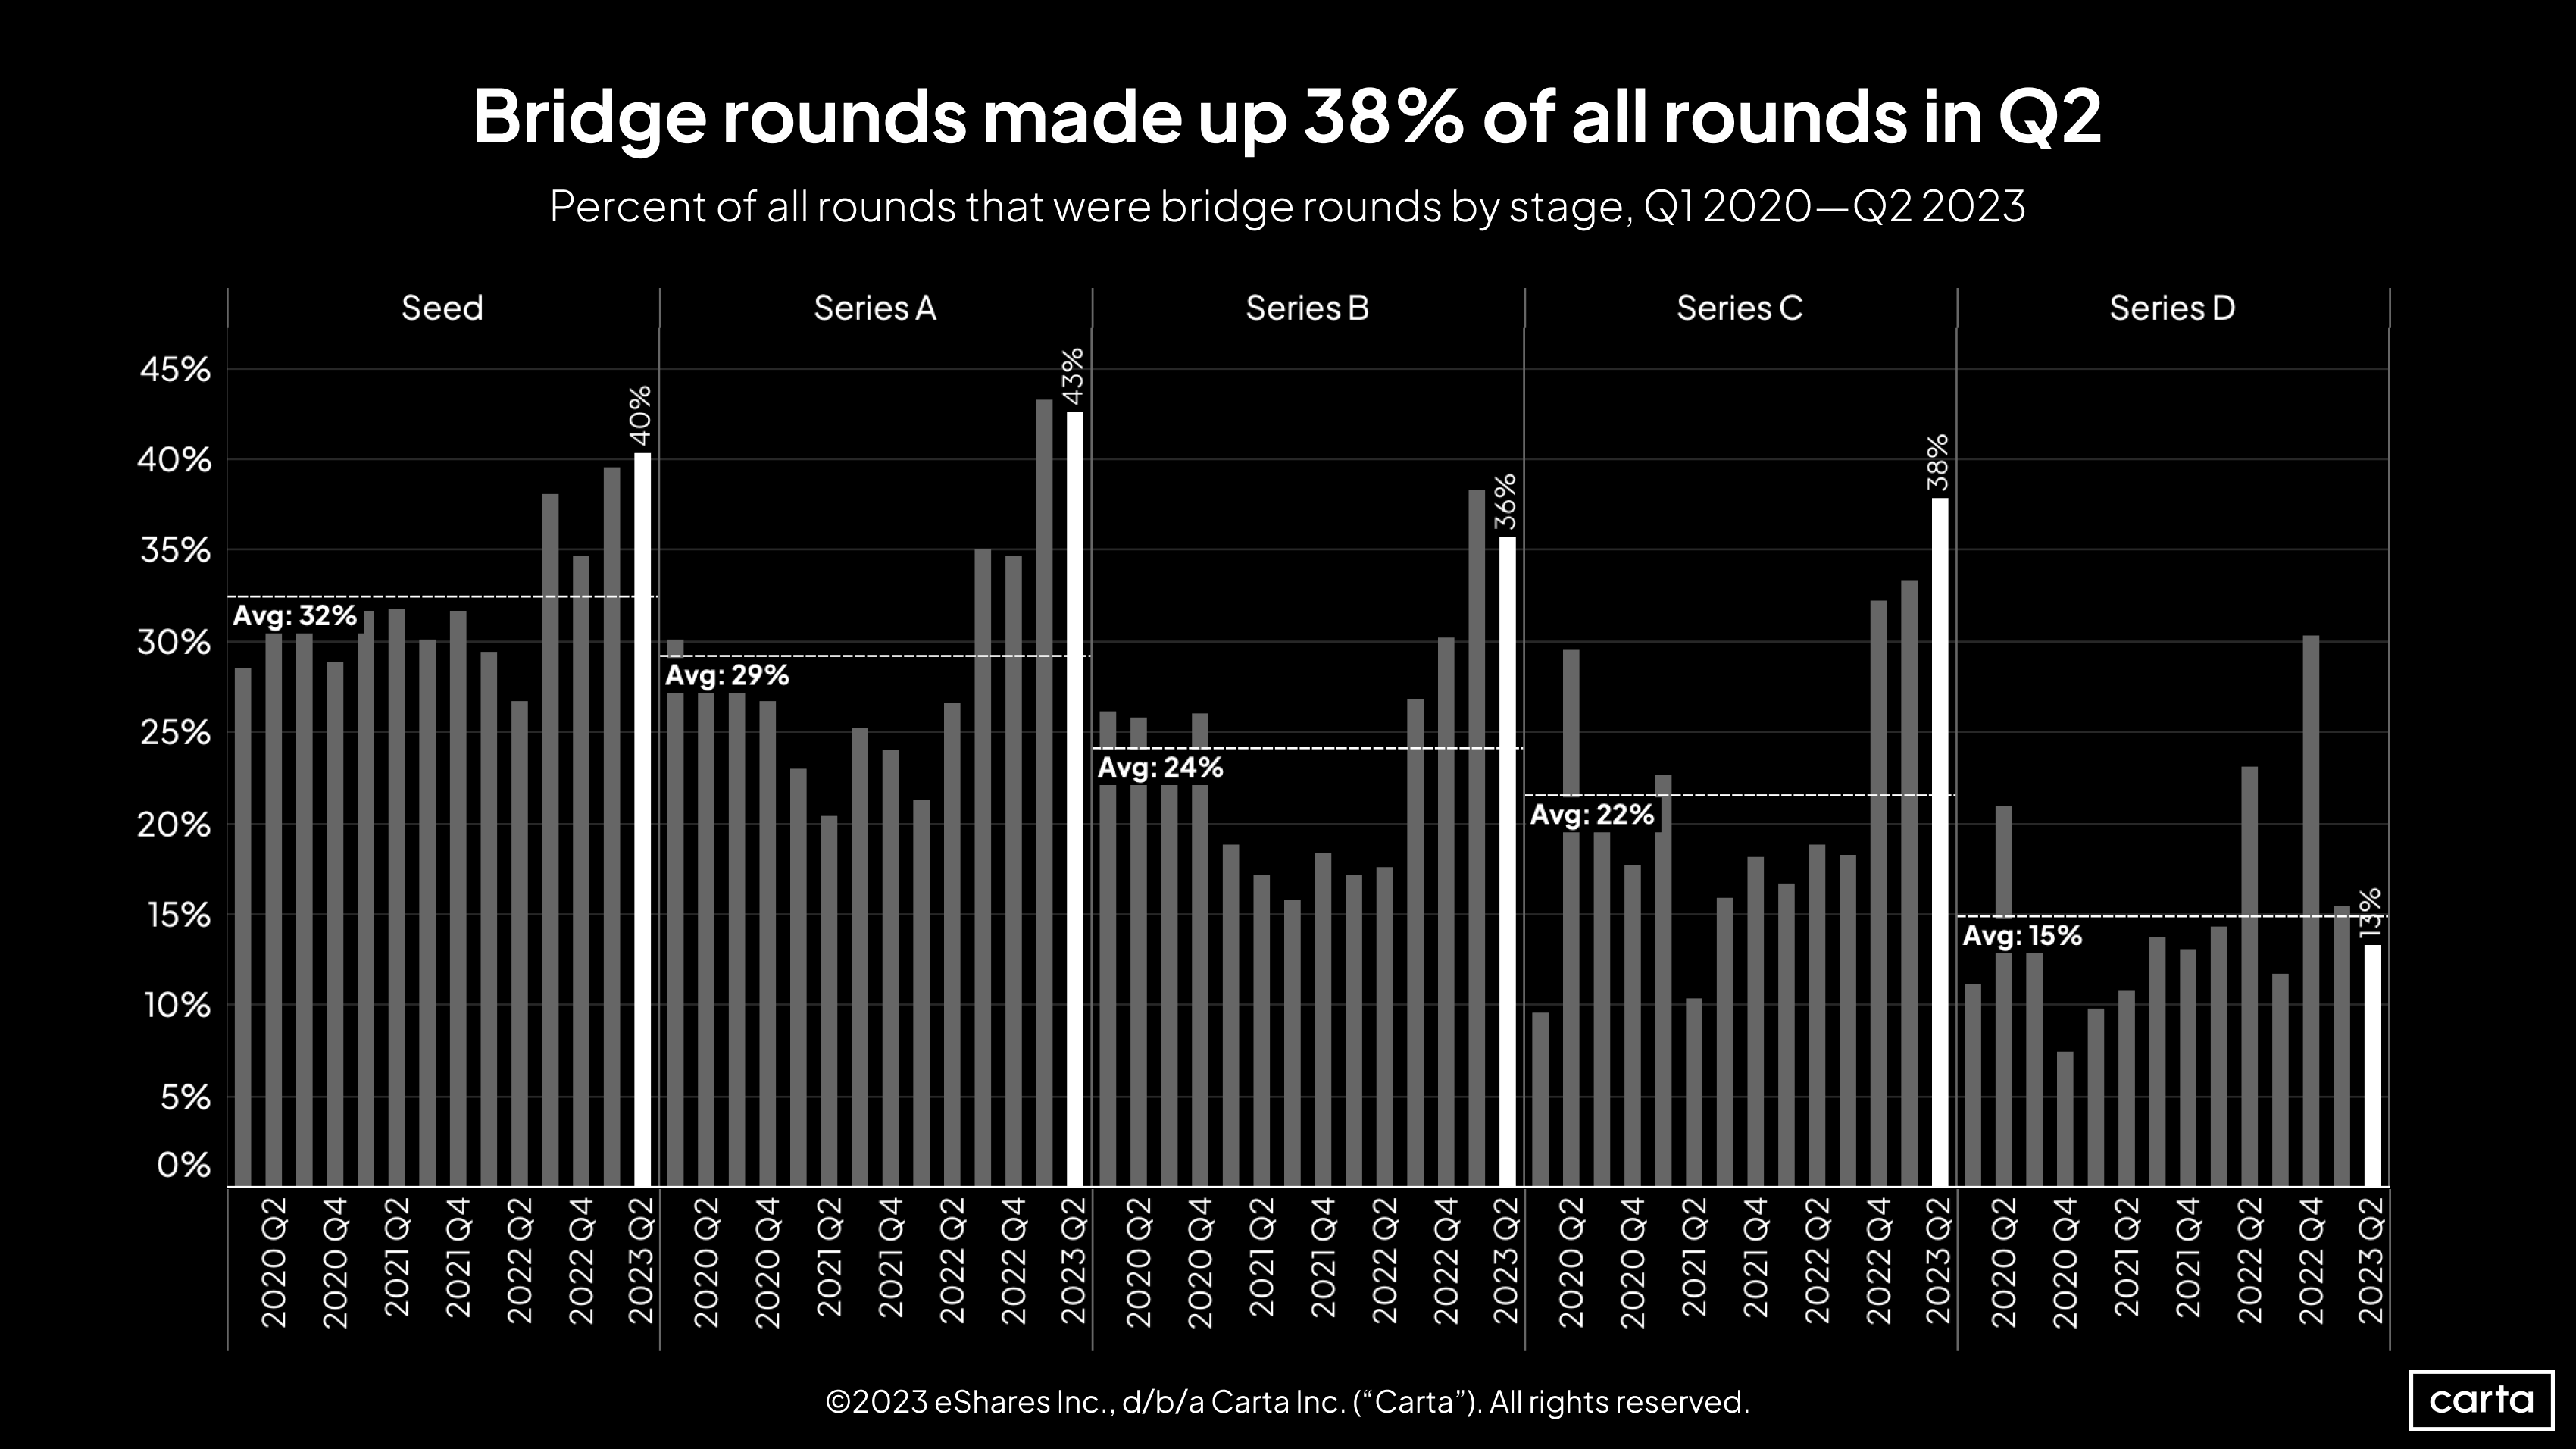 Percent of all rounds that were bridge rounds by stage, Q1 2020 - Q2 2023